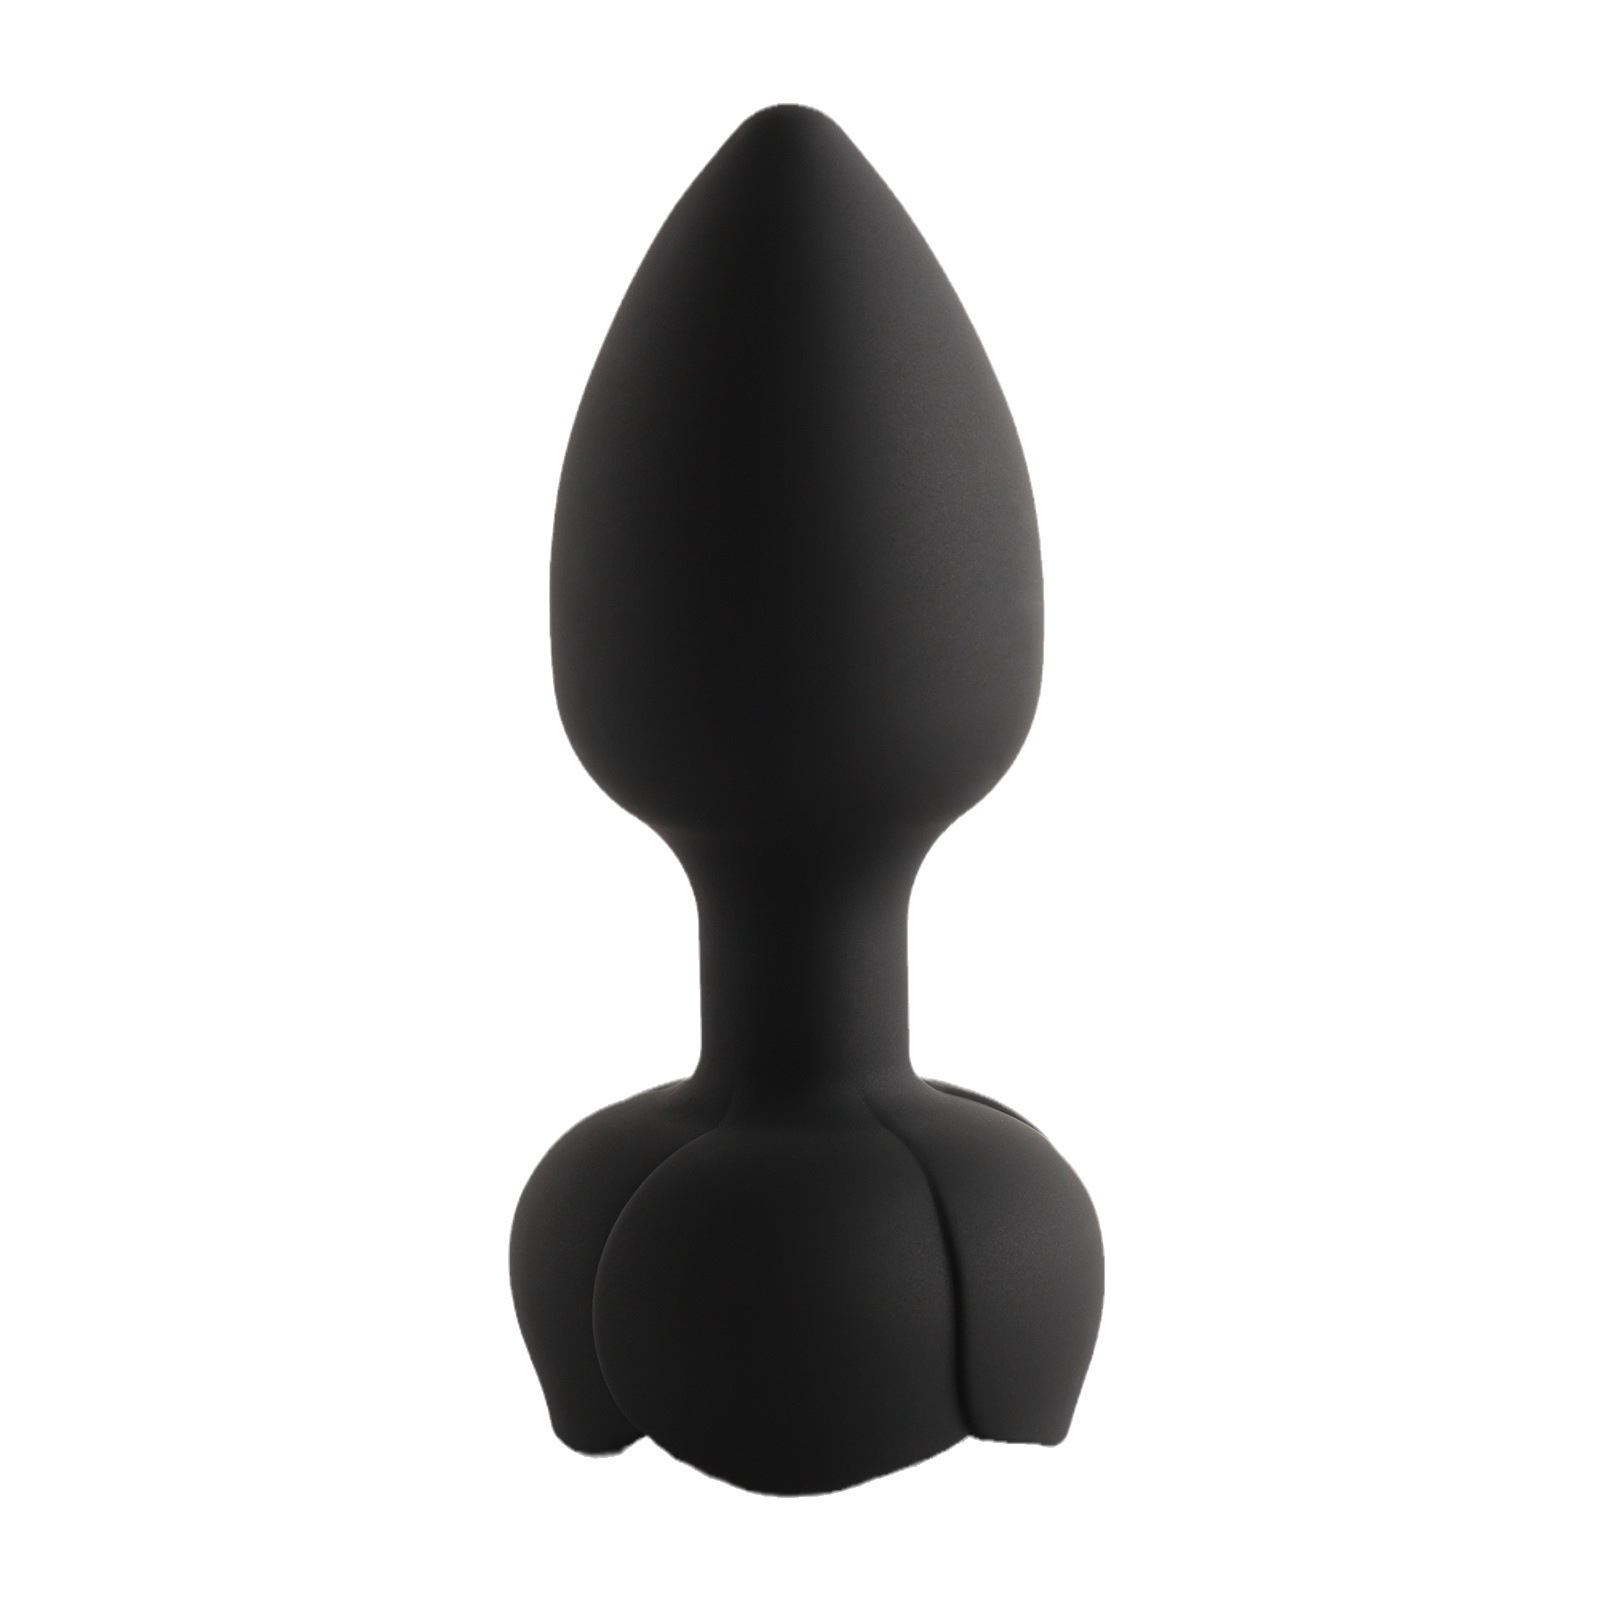 9.Black--Colorful glowing Adult Sex Toys